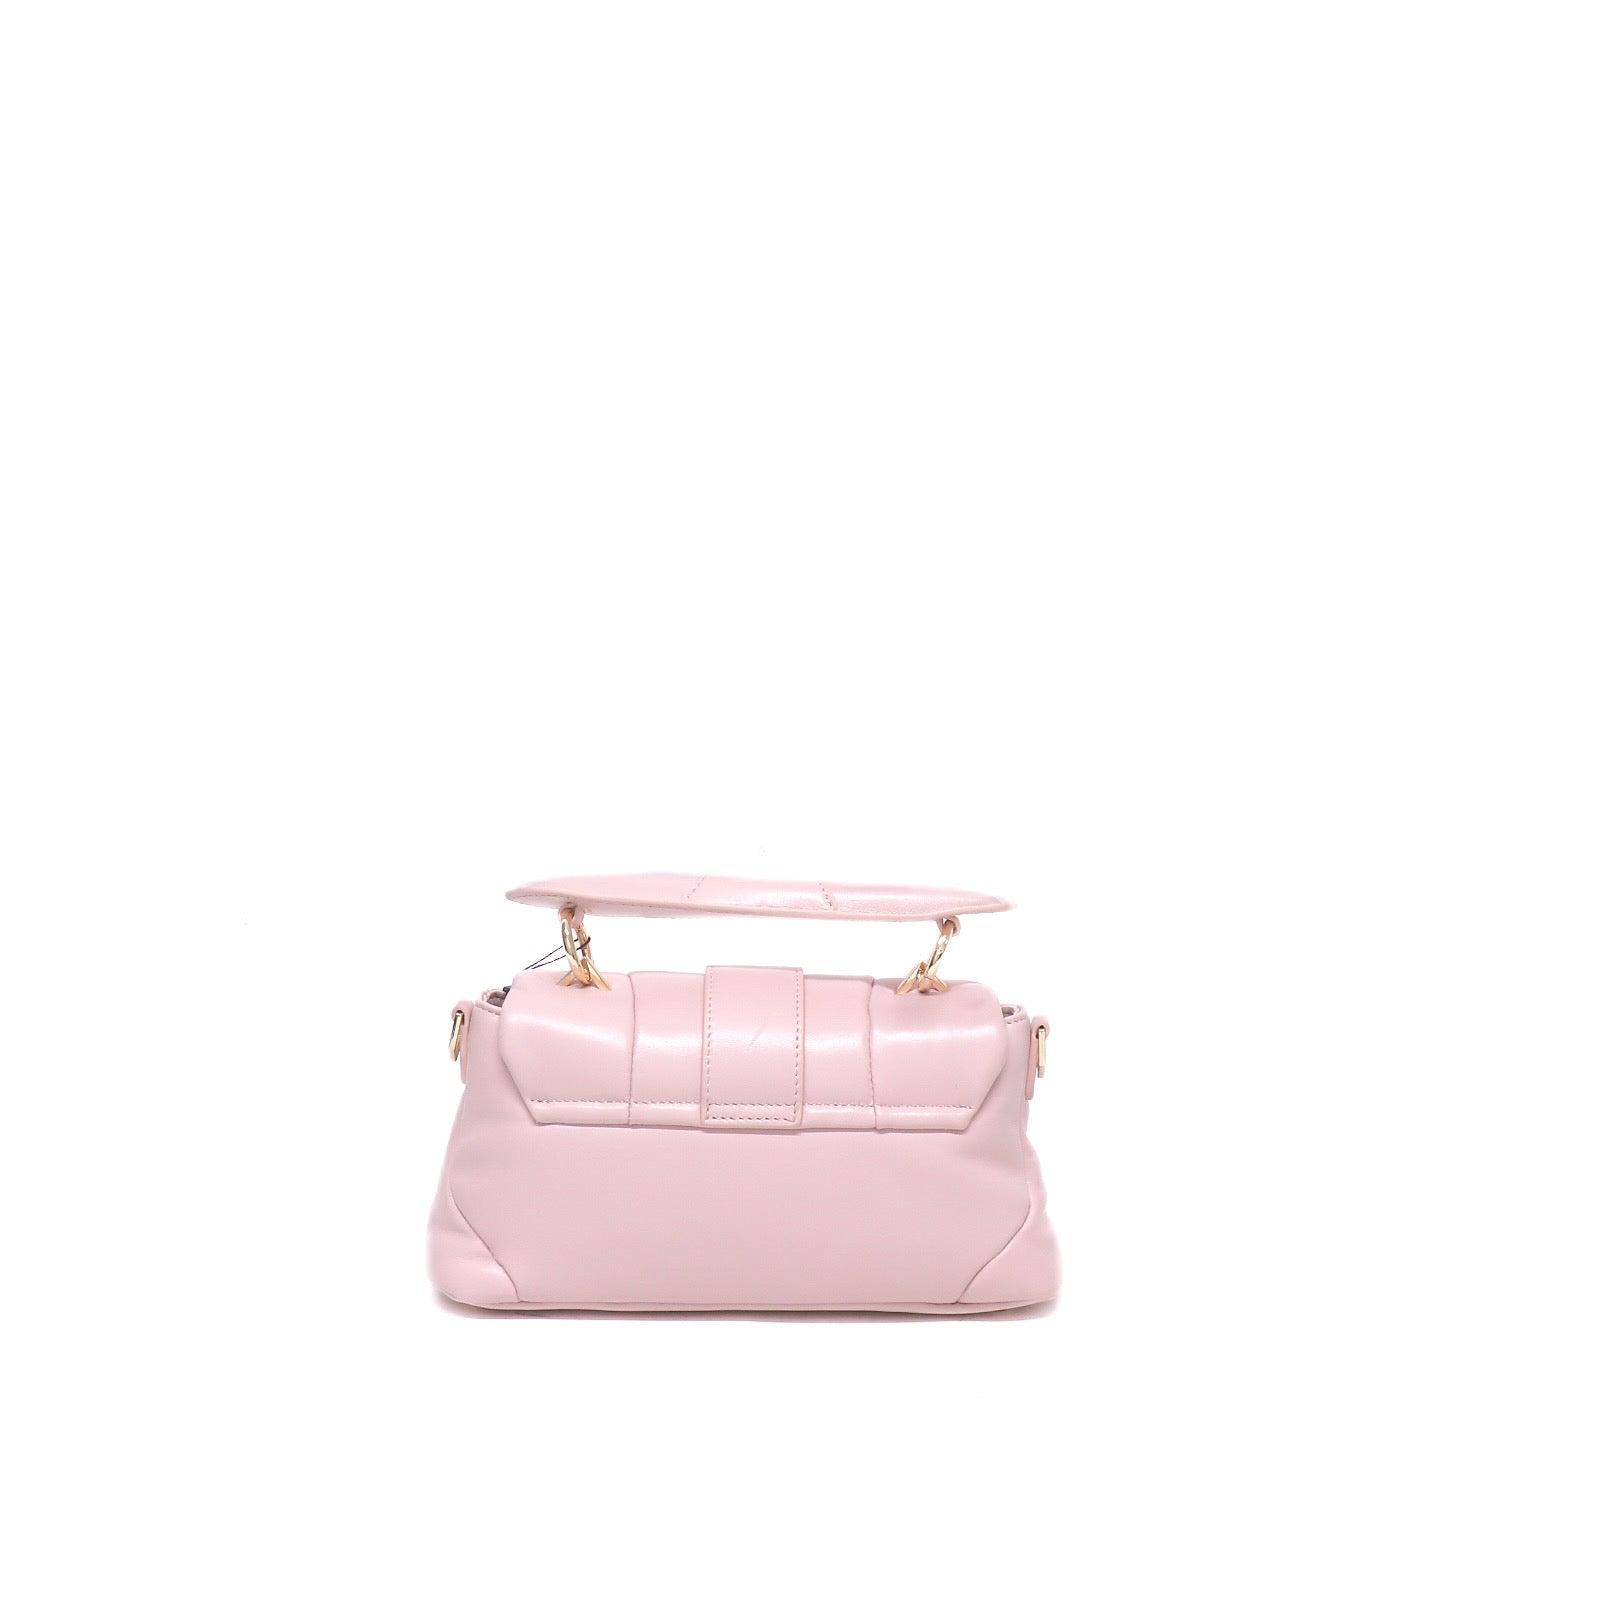 The Carrie Bag Pink Bag